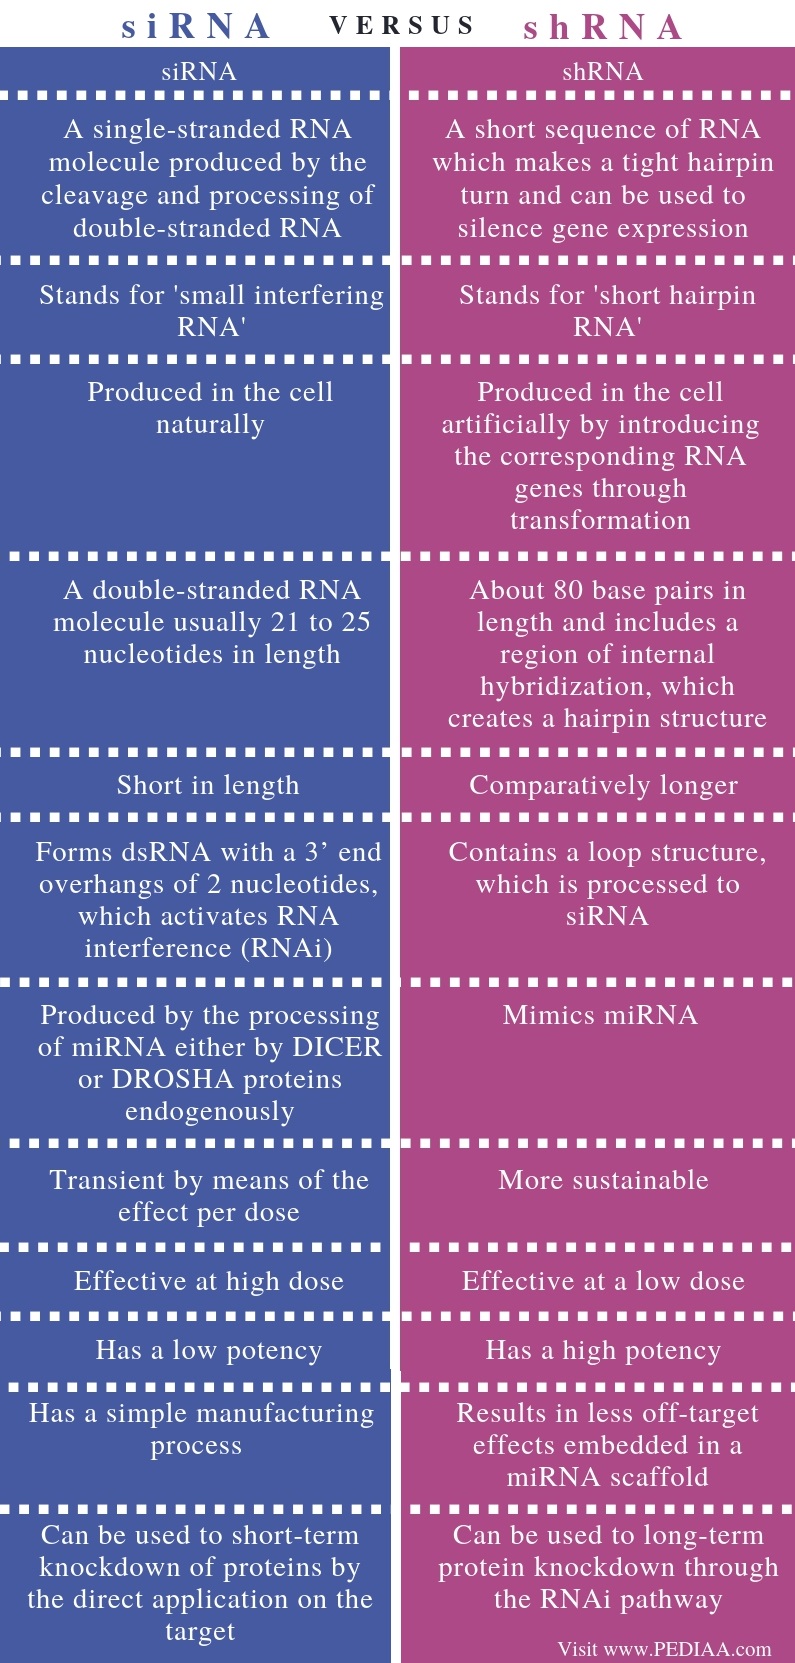 Difference Between siRNA and shRNA - Comparison Summary